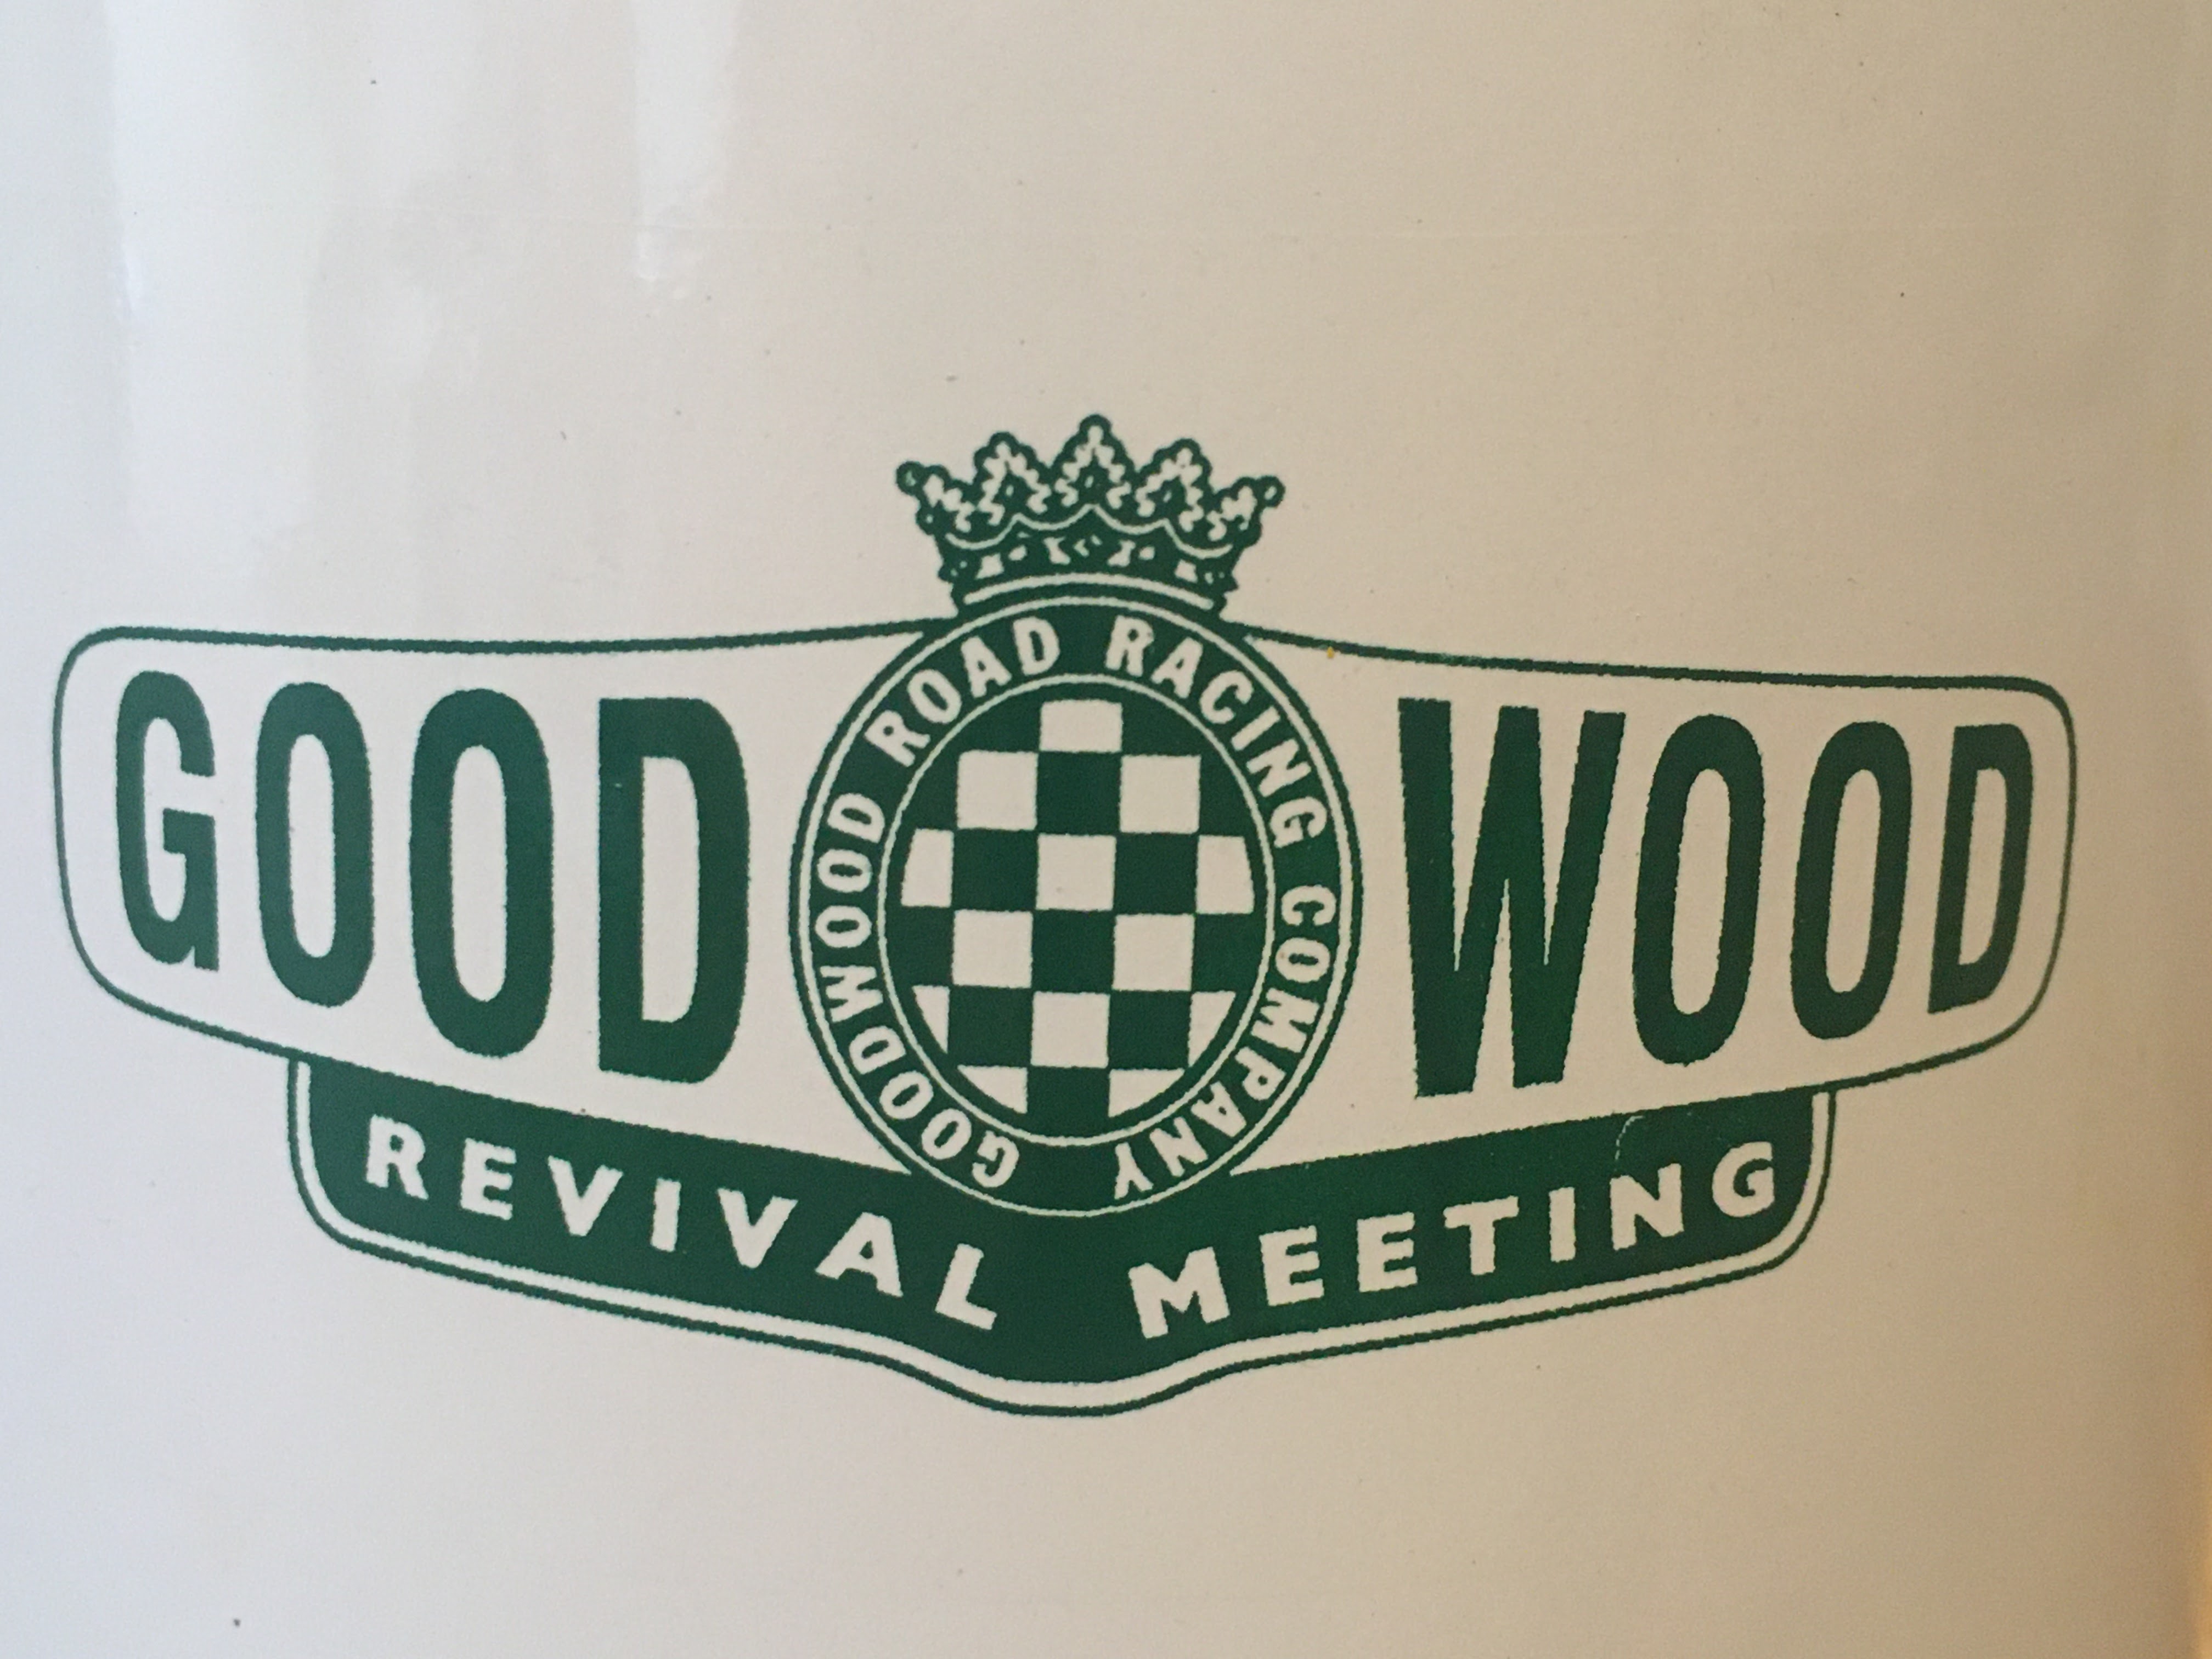 Official Goodwood Revival Meeting Mug - Image 2 of 5